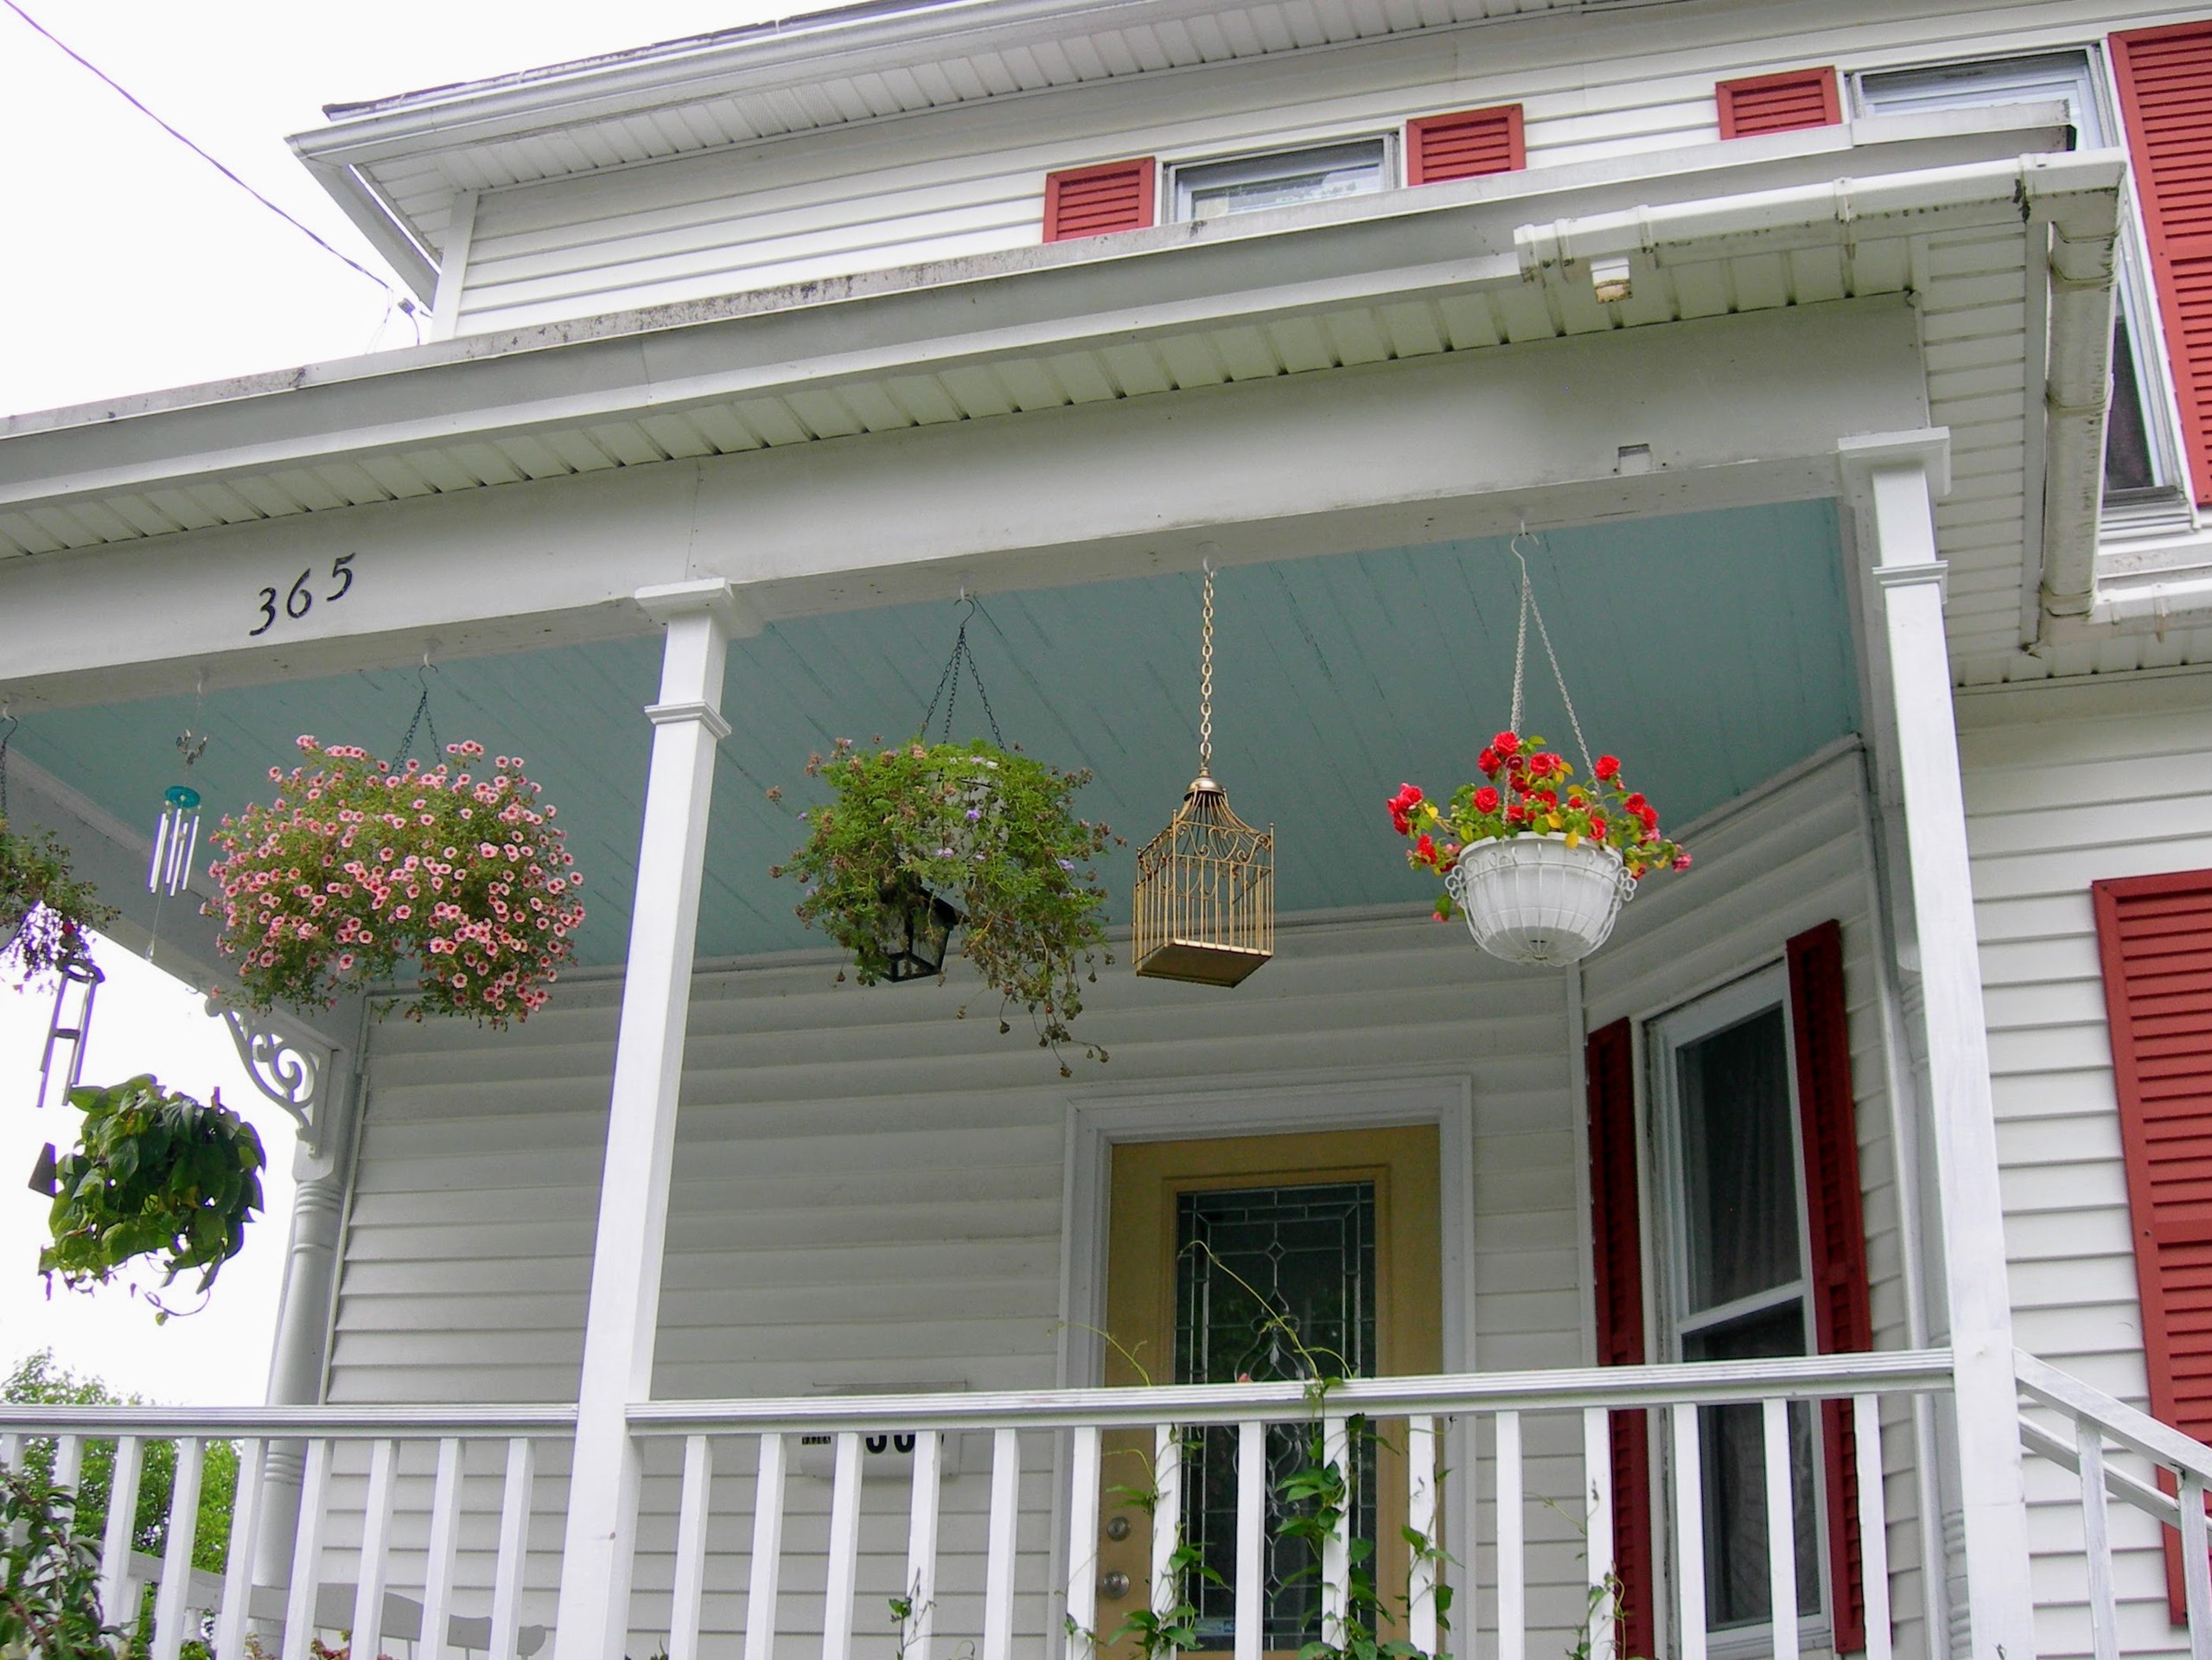 A photograph of Haint Blue paint on the porch of an American house.